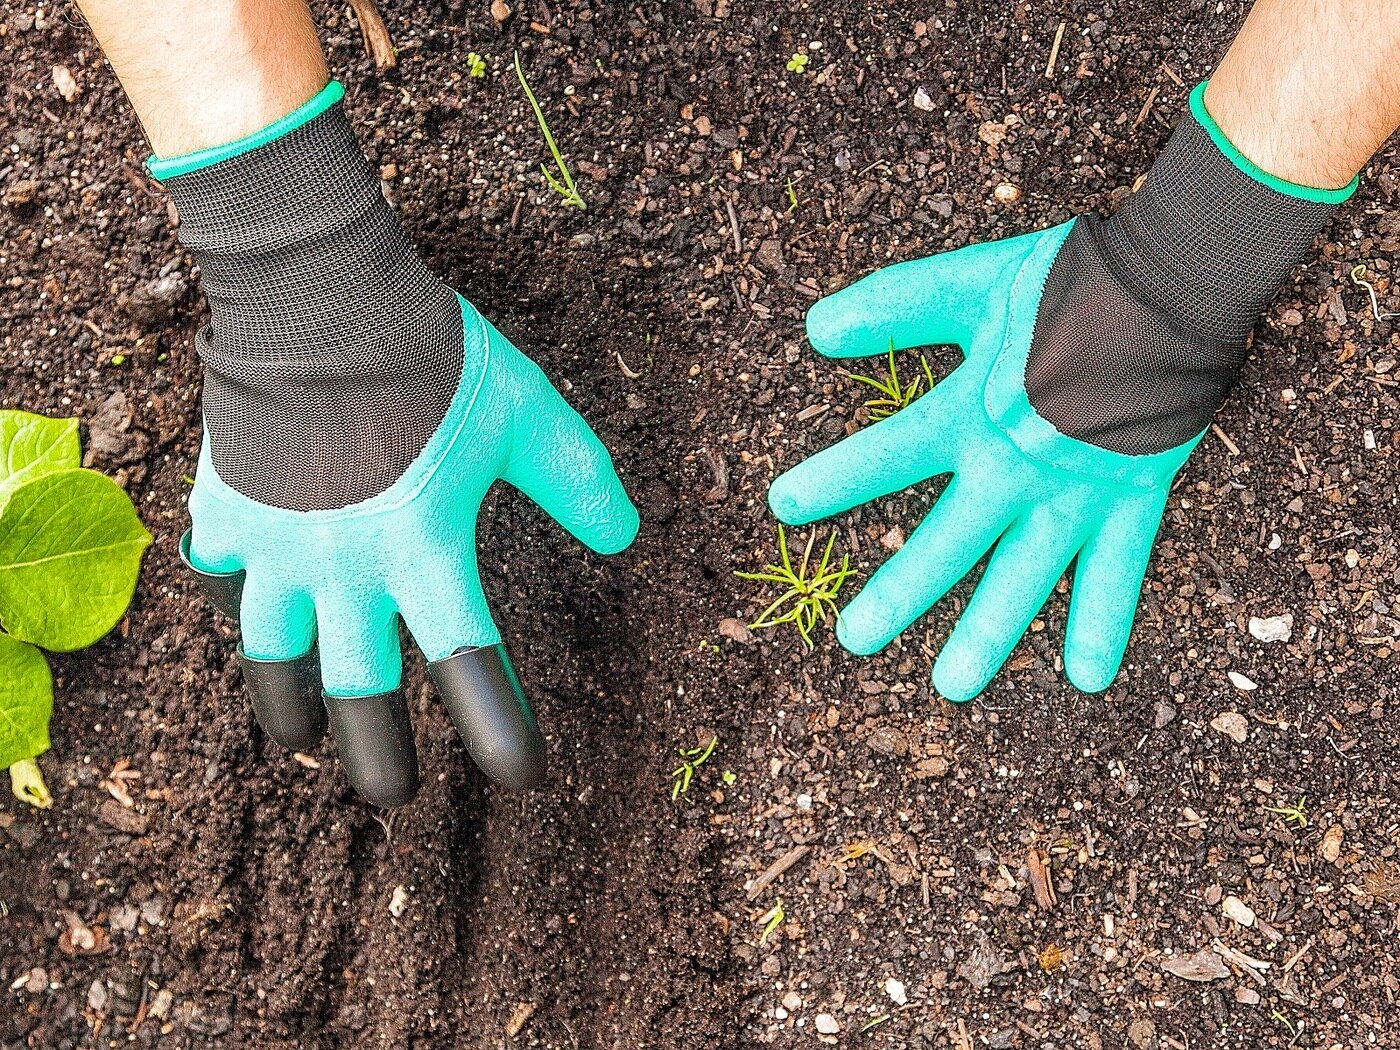 How to Clean Leather Gardening Gloves